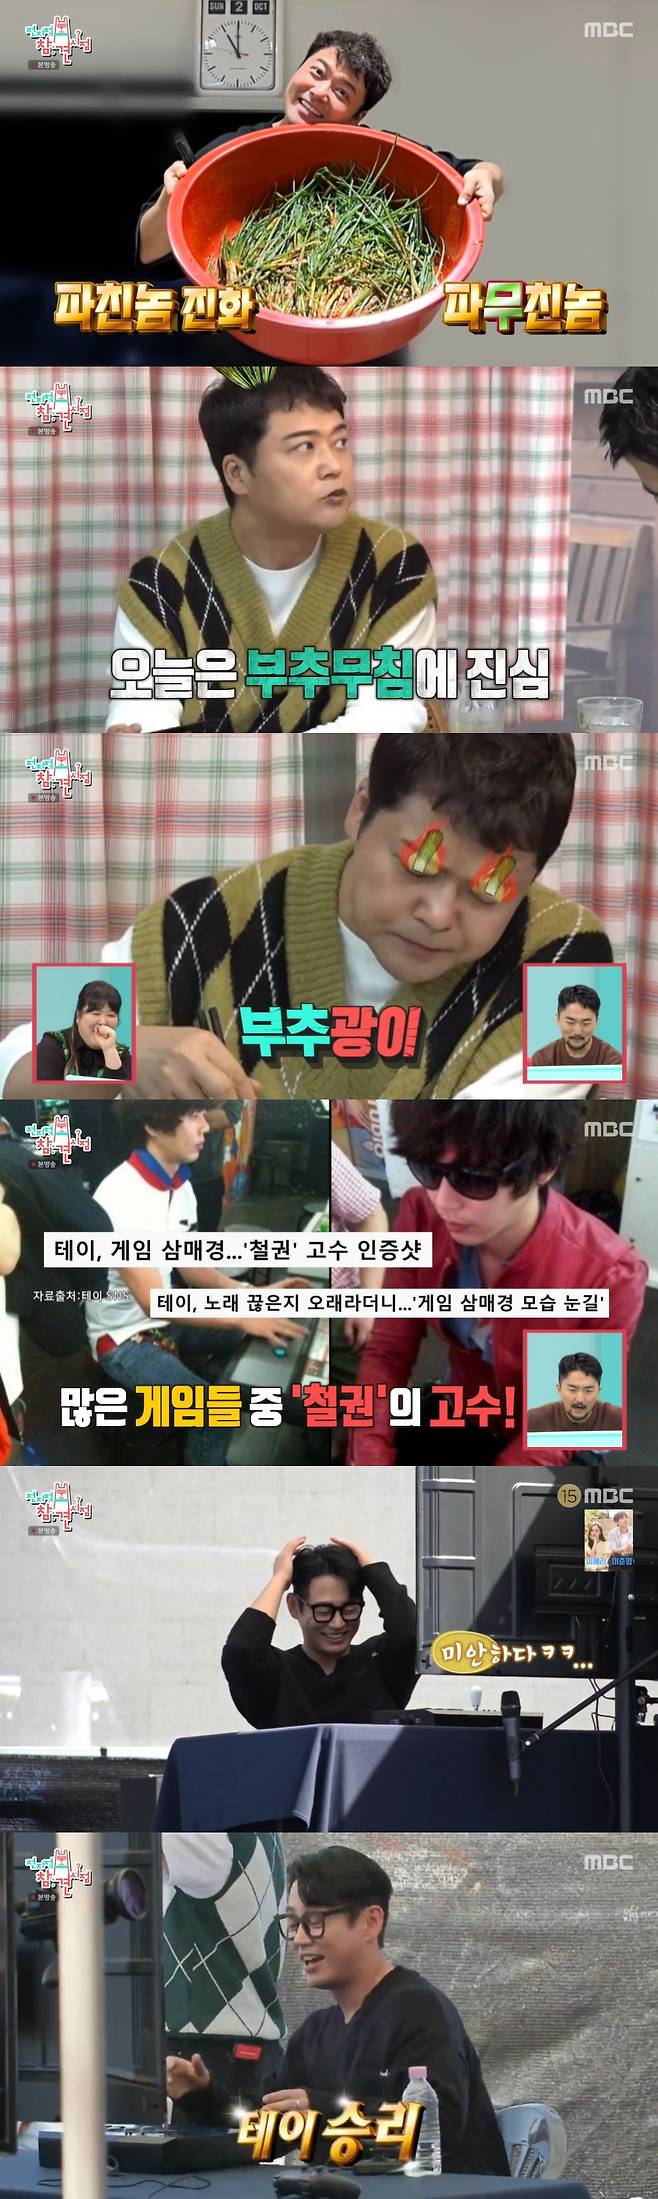 Seoul =) = Jun Hyun-moo laughed at Lee Young-jas Leek seasonings made by Lee Guk-joo following Lee Young-jas table,At MBCs Point of Omniscient Interfere, which aired on the 22nd, a video clip of comedian Lee Guk-joo and manager Lee Sang-soo was released.Jun Hyun-moo and Yoo Byung-jae came to Lee Guk-joos house to play; Yoo Byung-jae gave him a rice cake as a present; Jun Hyun-moo brought his own dipped pork kimchi.Lee Young-ja said, Well done, the color came out well. Lee Guk-joo, who had a bite, also admired the dish.Yoo Byung-jae said, Ive eaten in many places since that day, but there is no similar thing. Jun Hyun-moos dipping was similar to Lee Young-jas dipping.The four people who ate the pork kimchi gathered opinions to eat the ramen noodles.Jun Hyun-moo and Yoo Byung-jae came to Lee Guk-joos house to share a lot of kitchen utensils at Lee Guk-joos house.Lee Guk-joo ate the green onion kimchi and asked Jun Hyun-moo if he had a girlfriend. Lee Guk-joo suggested to dip the green onion kimchi together.Jun Hyun-moo refused, saying he would do it himself.Lee Guk-joo started grilling green onion kimchi, giblets and intestines to be eaten, and made a leek dish to accompany it. Jun Hyun-moo made the leek dish before eating the giblets. Lee Guk-joo made another leek dish.Lee Guk-joo began to bake daechang, giblets, chili peppers, mushrooms, potatoes, and chives together. Jun Hyun-moo, who ate a bite of meat, slapped Yoo Byung-jae and told him to eat quickly.Meanwhile, singer Tei and manager Kim Young-hyes meddling video was released. Teis schedule was not a singing event but an iron-fisted Game Event. Tei is rumored to be an iron-fisted person.Teis first opponent was a child. Tei won the game without even watching the children.Tei said, Ive never actually met this level when I play the game. Im so excited.Thank you, you can lose. Tei and Ko Soo came to the final round in a best-of-three match, and Tei won.